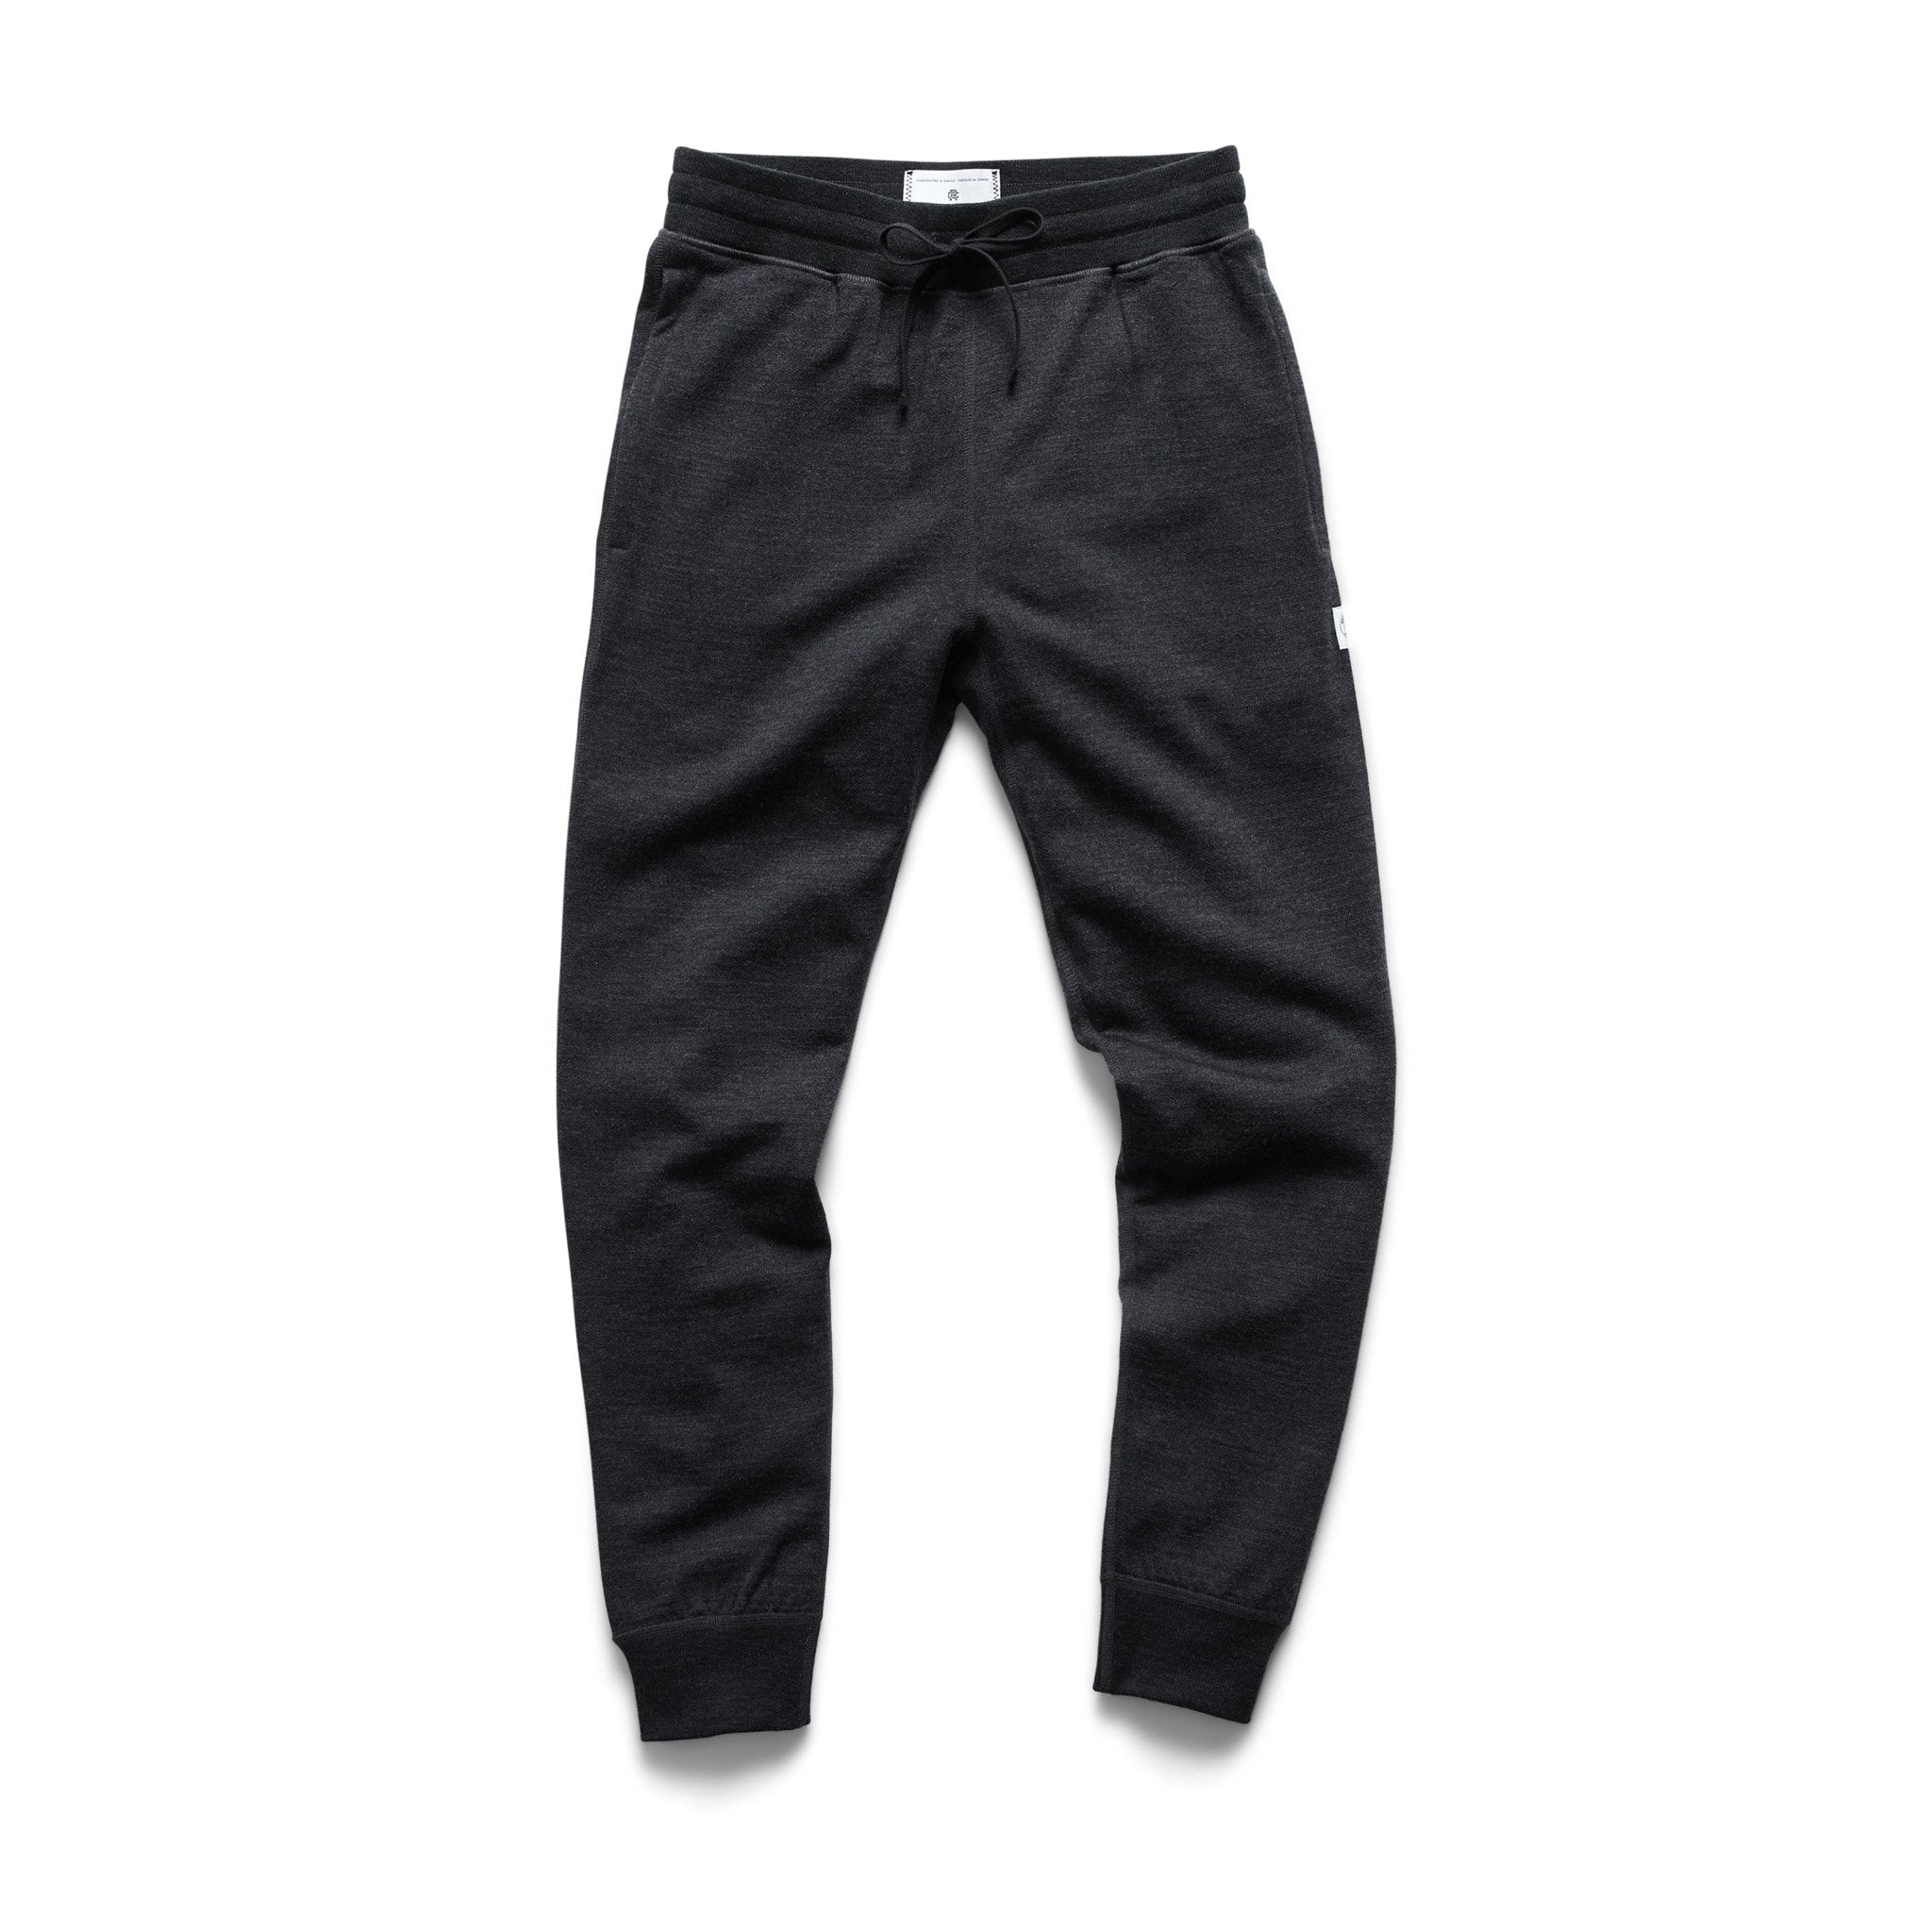 Reigning Champ】Merino Terry Pant | Reigning Champ JP